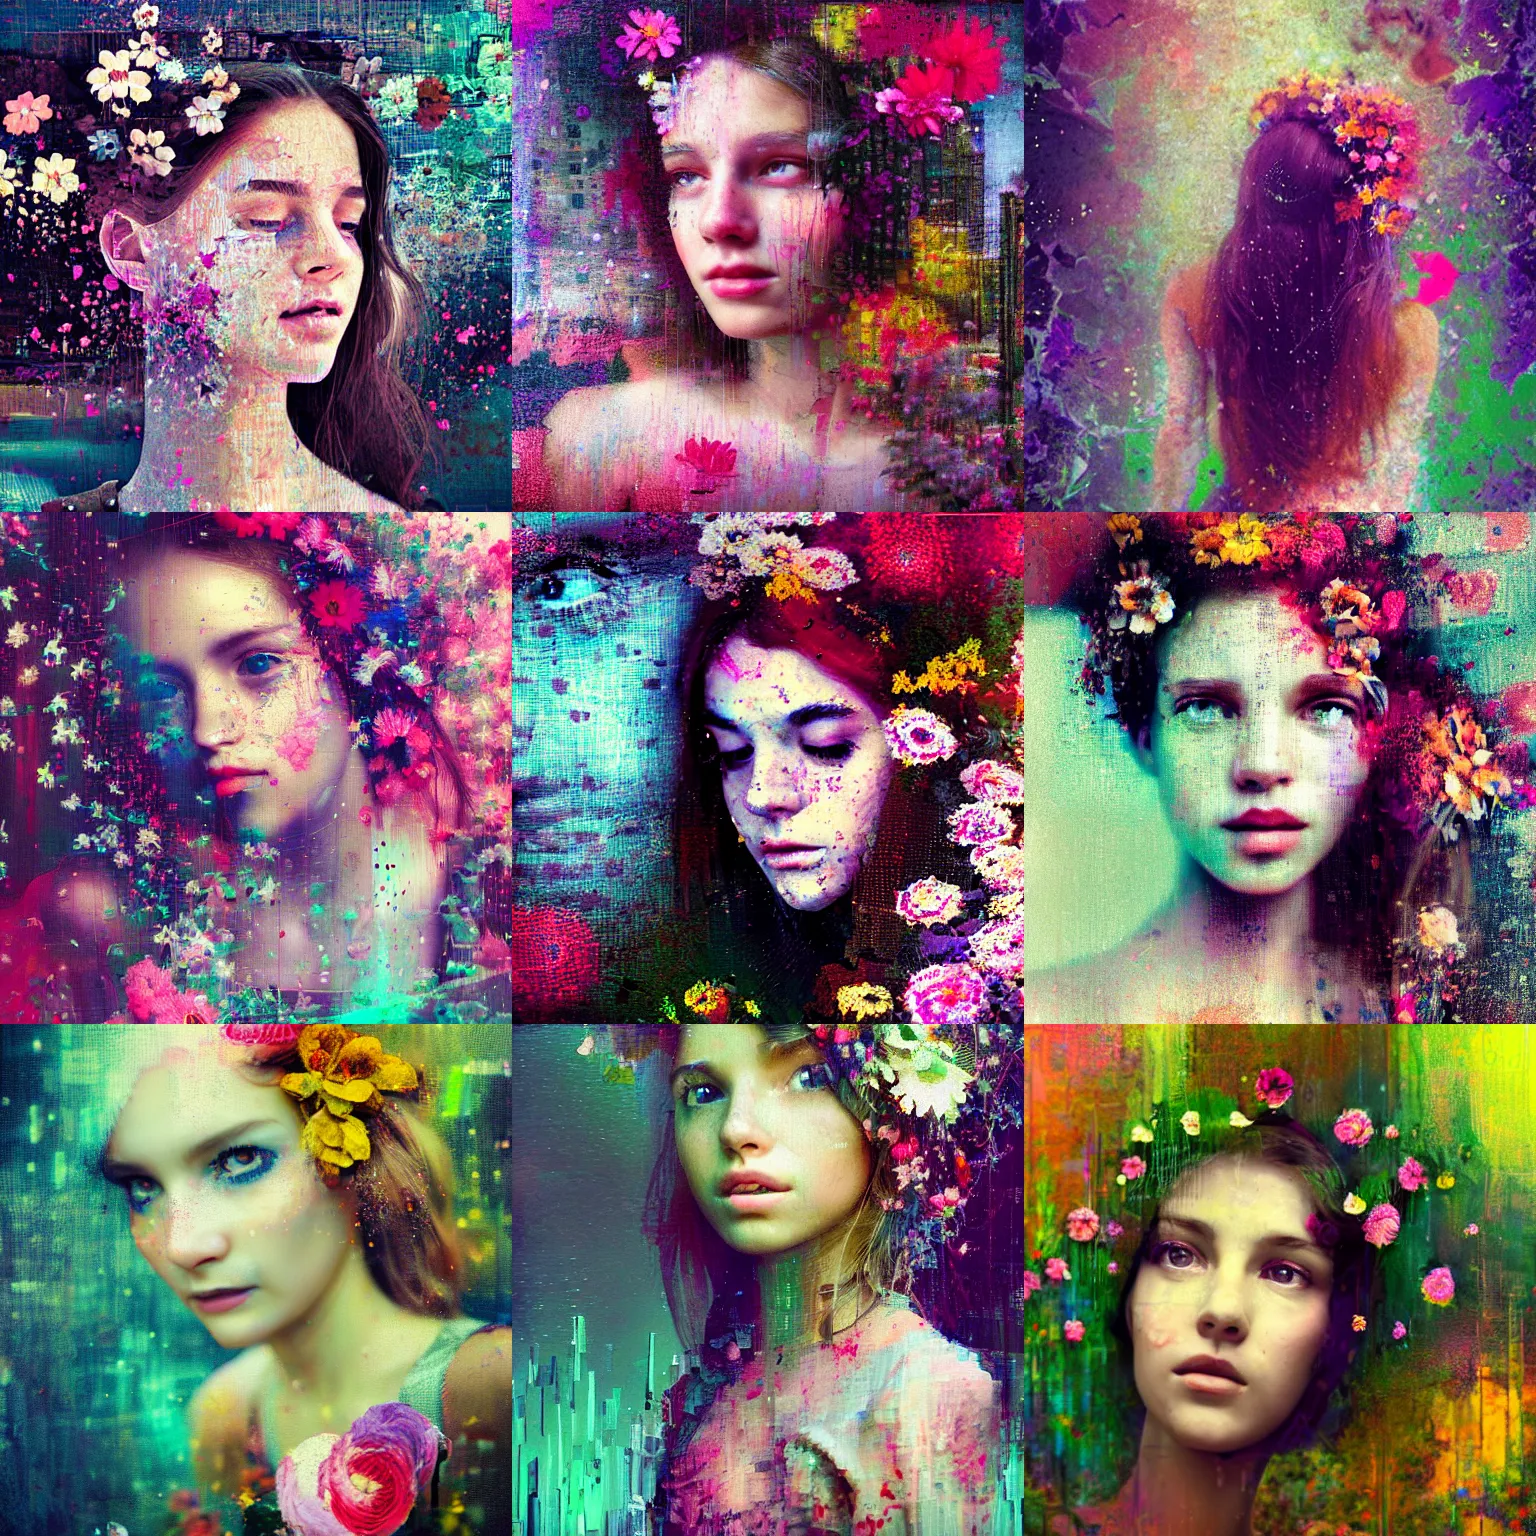 Prompt: beautiful girl portrait with flowers in her hair smiling, city setting : : raining, glitch art, glitched, pixel sorting, style of jeremy mann, oil painting, palette knife painting, style of james jean, style of ilya kushinov, somber, ethereal, corrupted data, vhs glitched screen, broken lcd screen, broken memories